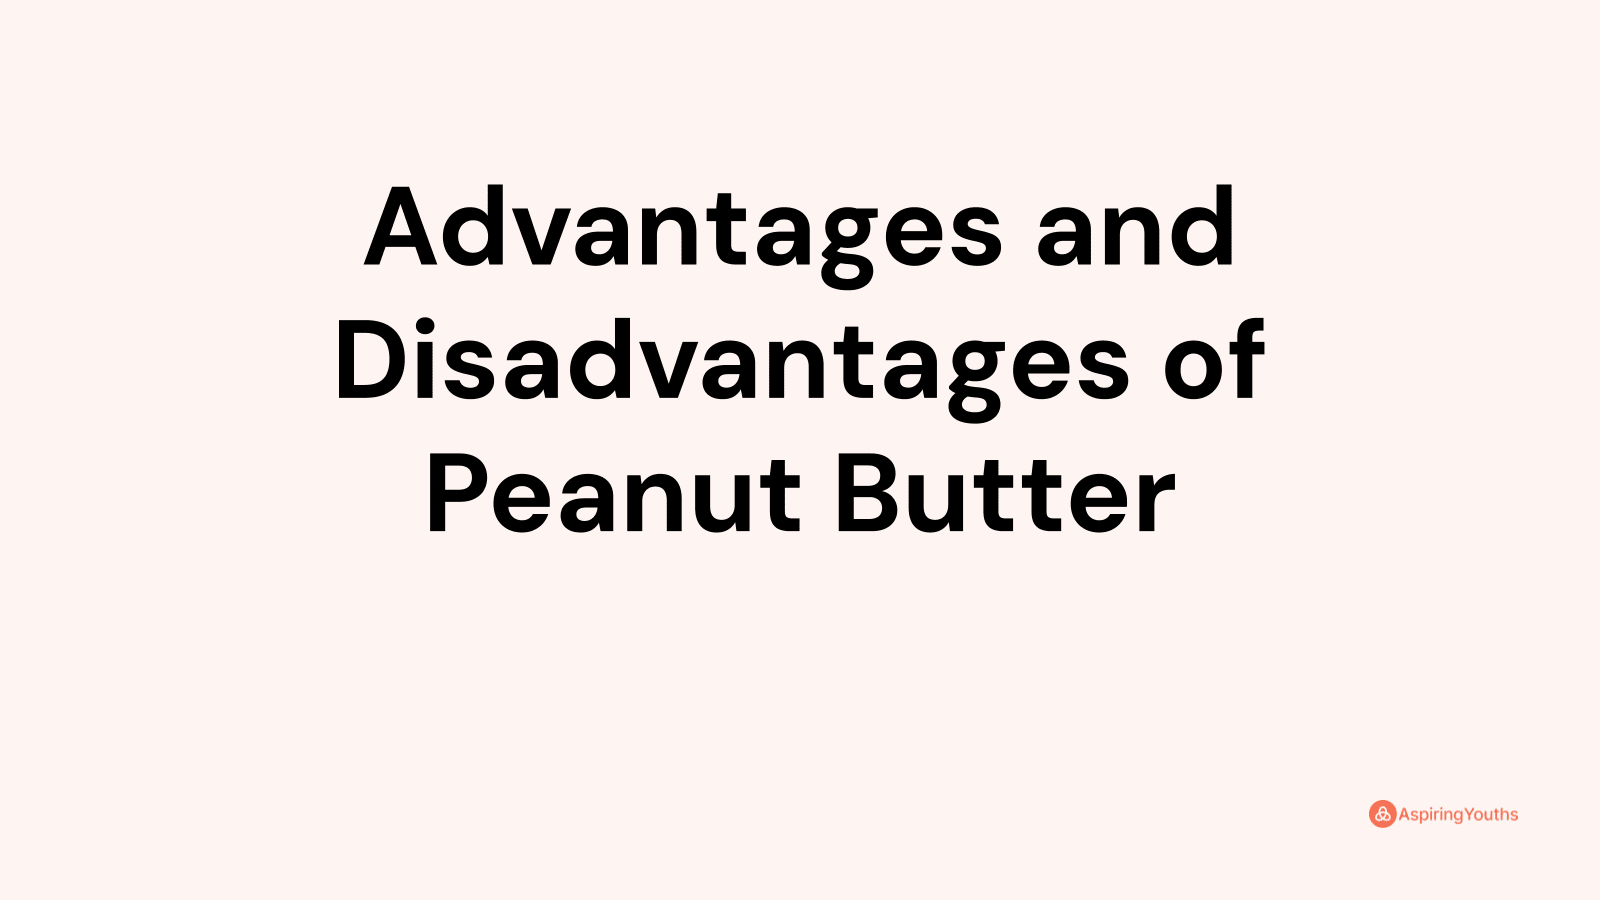 Advantages and disadvantages of Peanut Butter